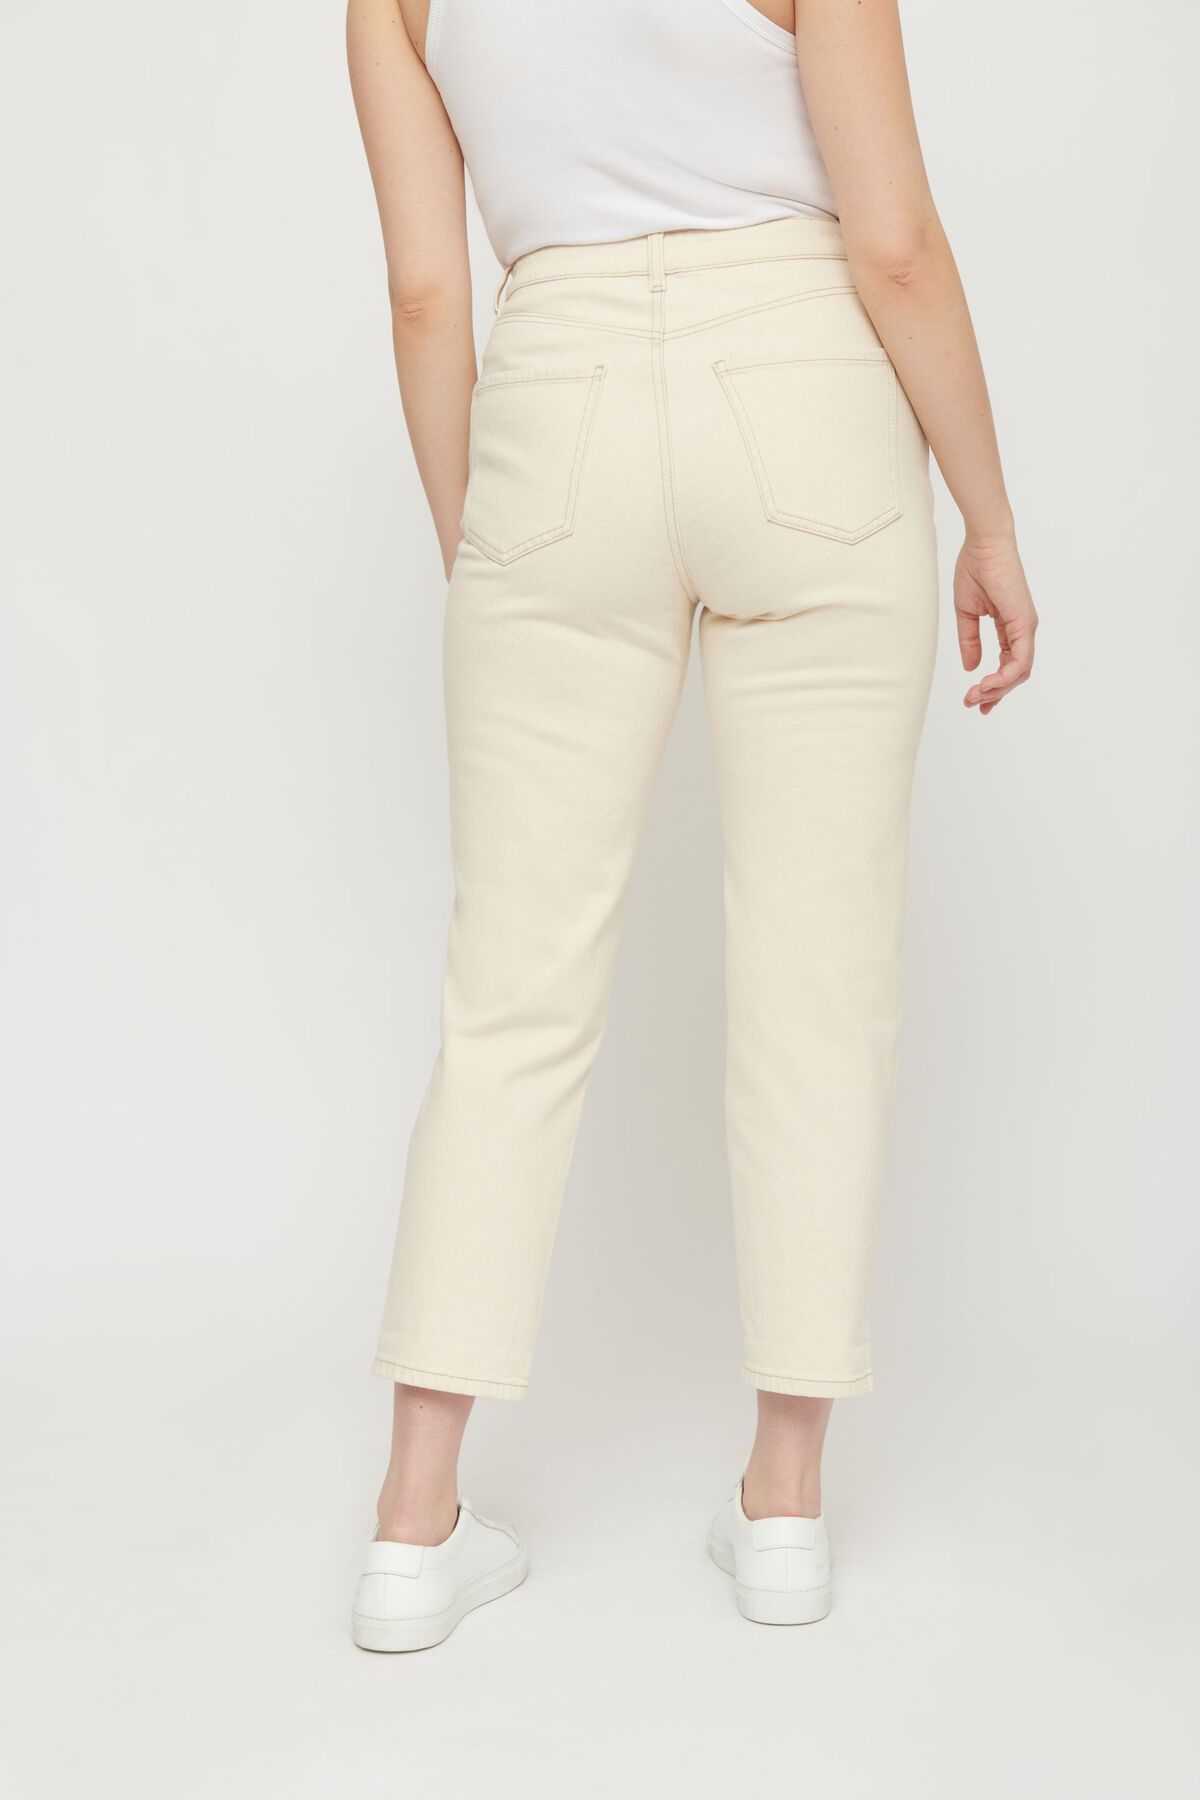 Dynamite Claudia Relaxed Mom Jeans - 1000625962V8